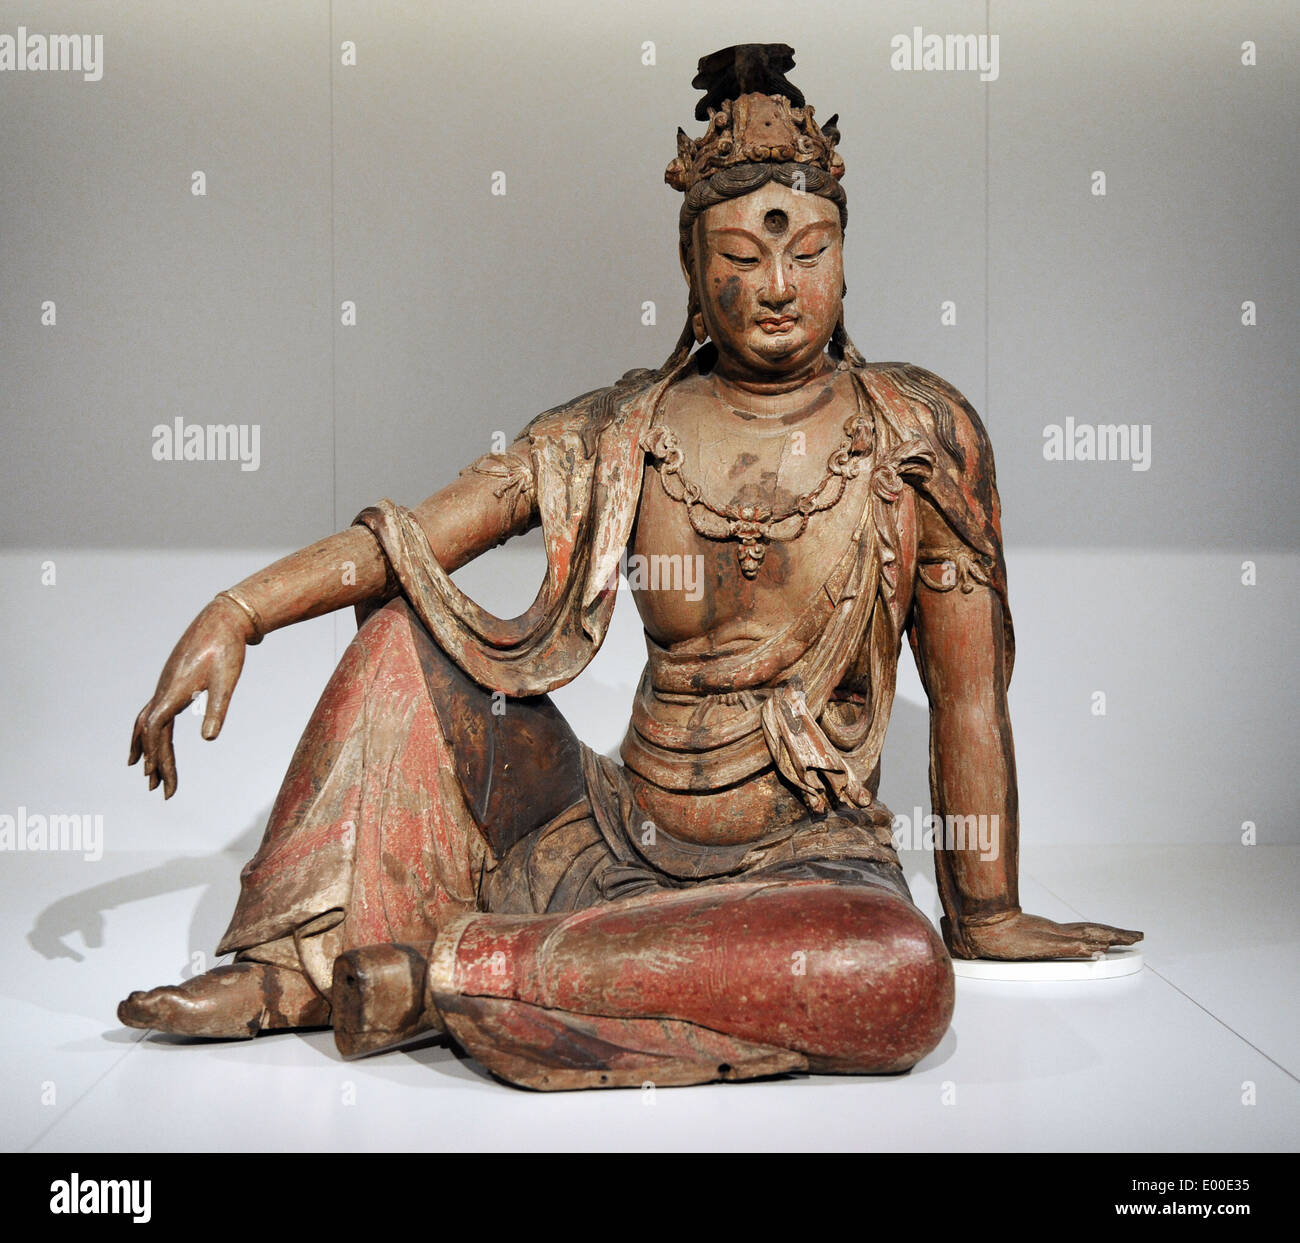 Buddhist deity Guanyin. 12th century. Painted and gilded wood. Shanxin, China. Rijksmuseum. Amsterdam. Holland. Stock Photo